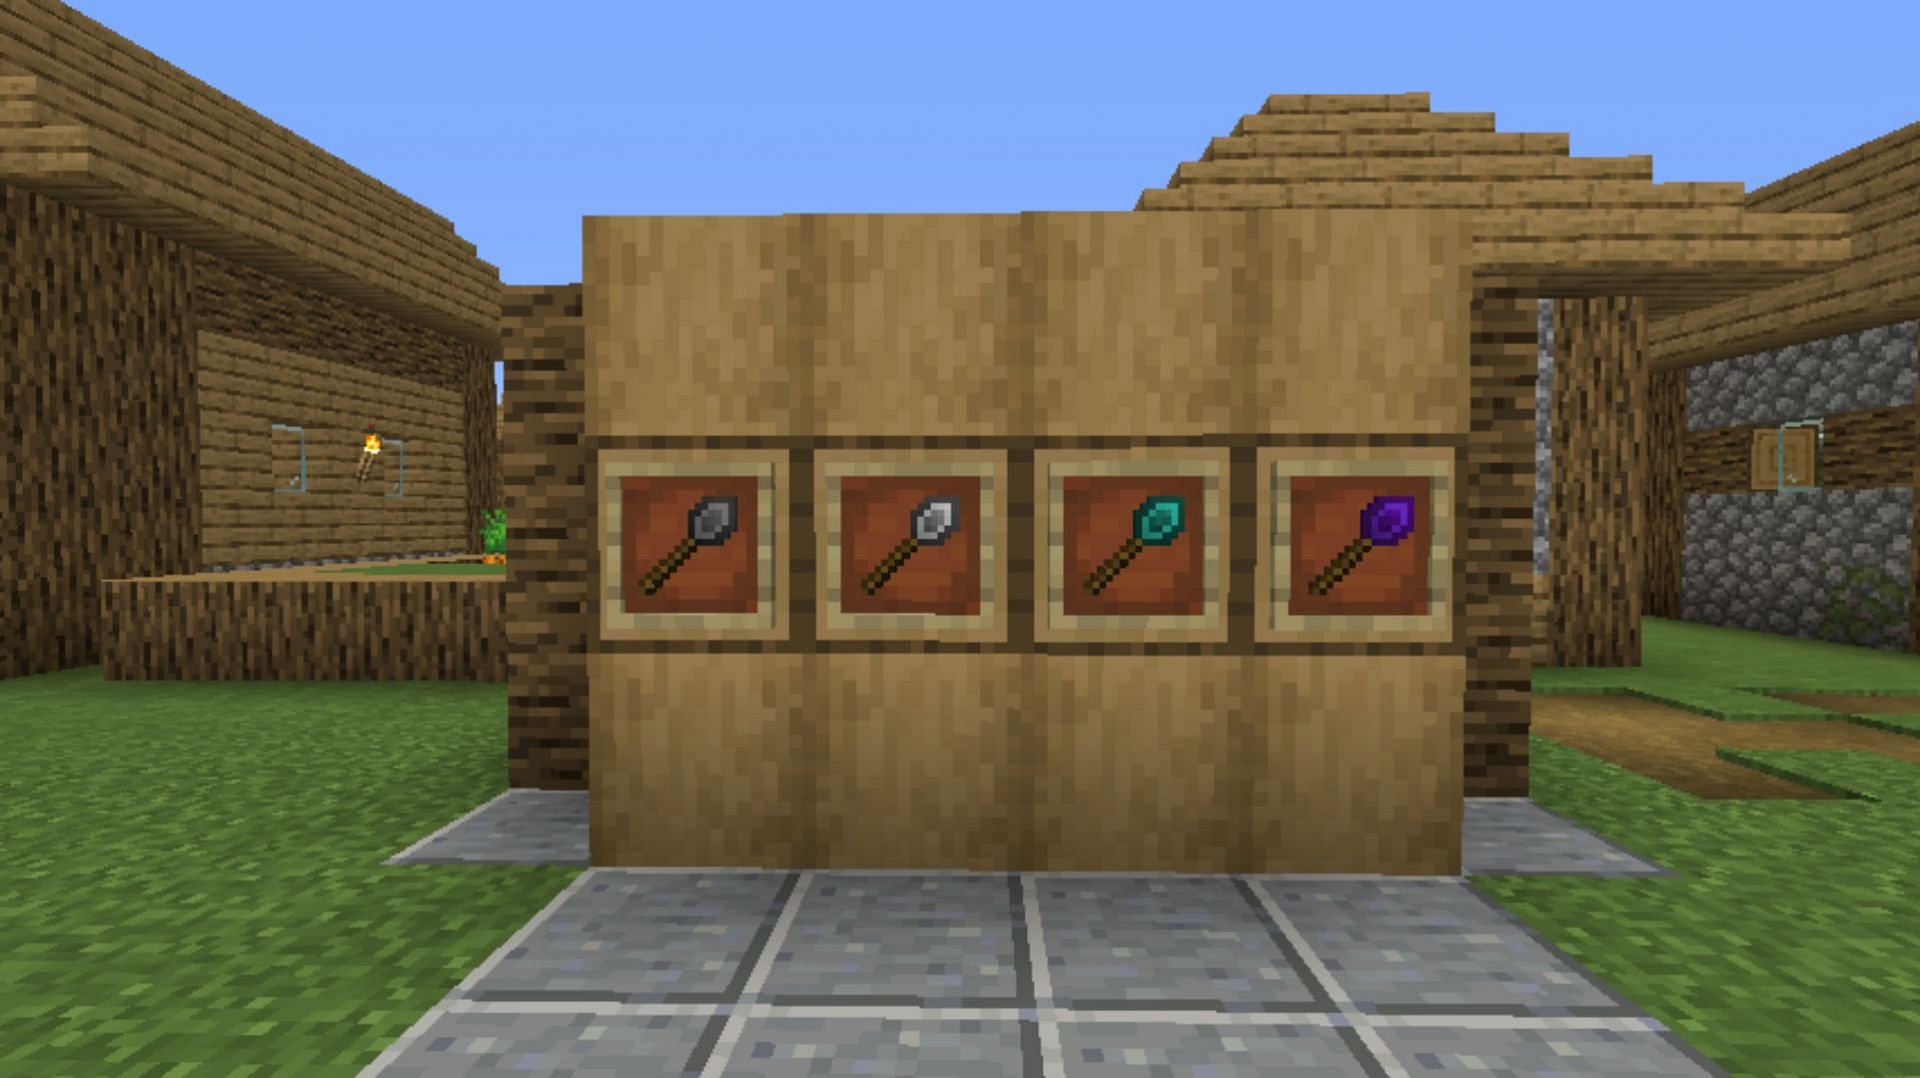 The construction wand allows players to manage multiple blocks at once in Minecraft. (Image via CurseForge)